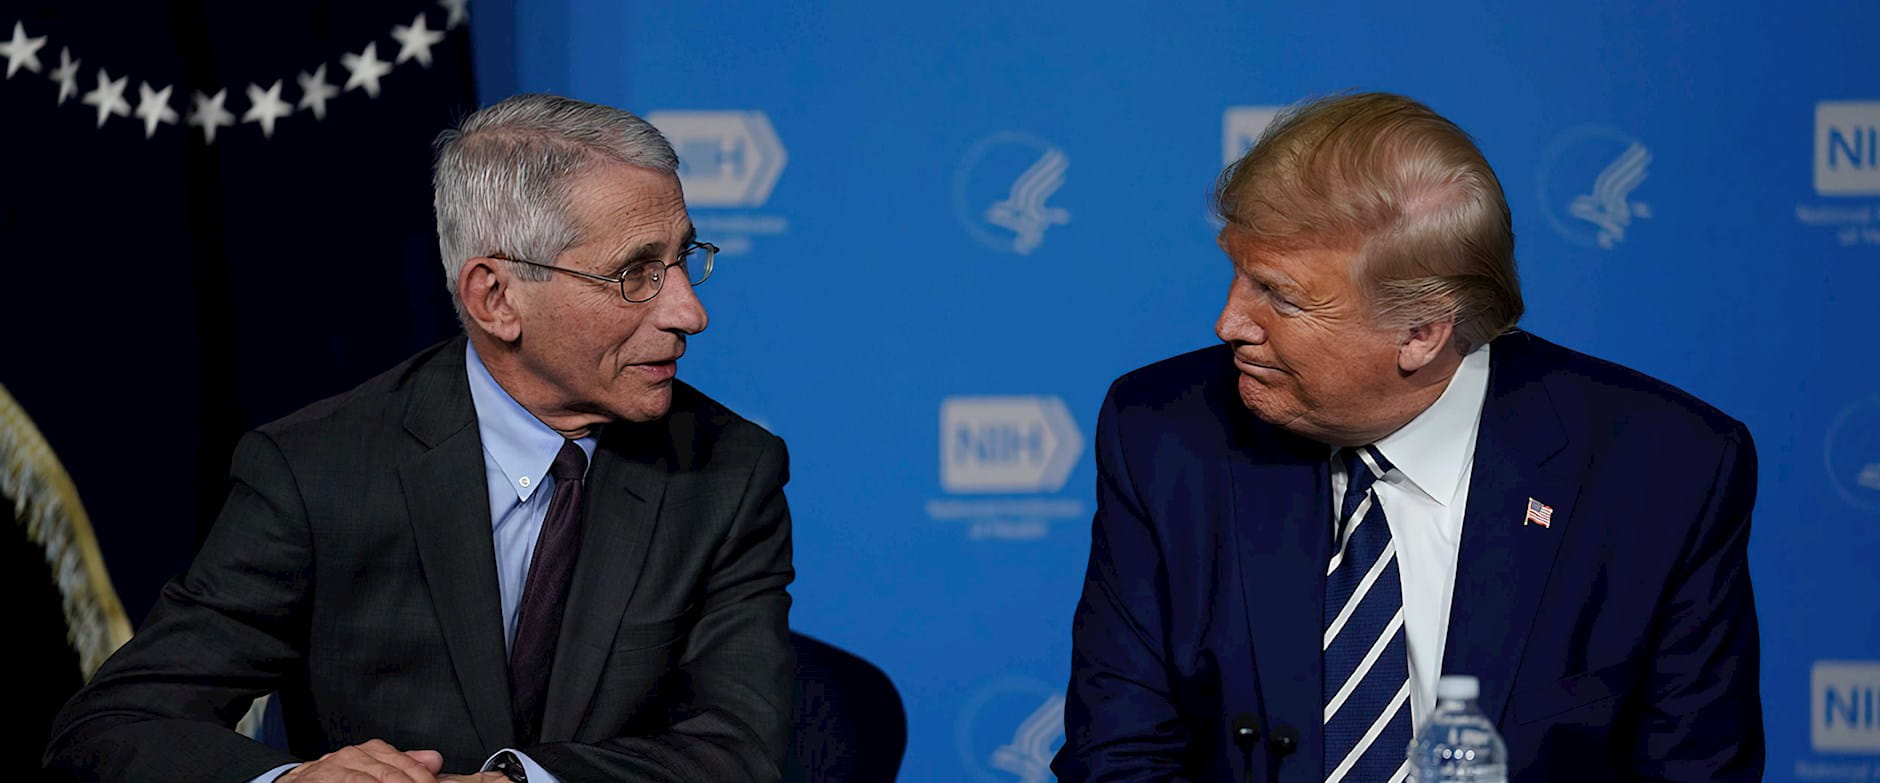 Anthony Fauci and Donald Trump